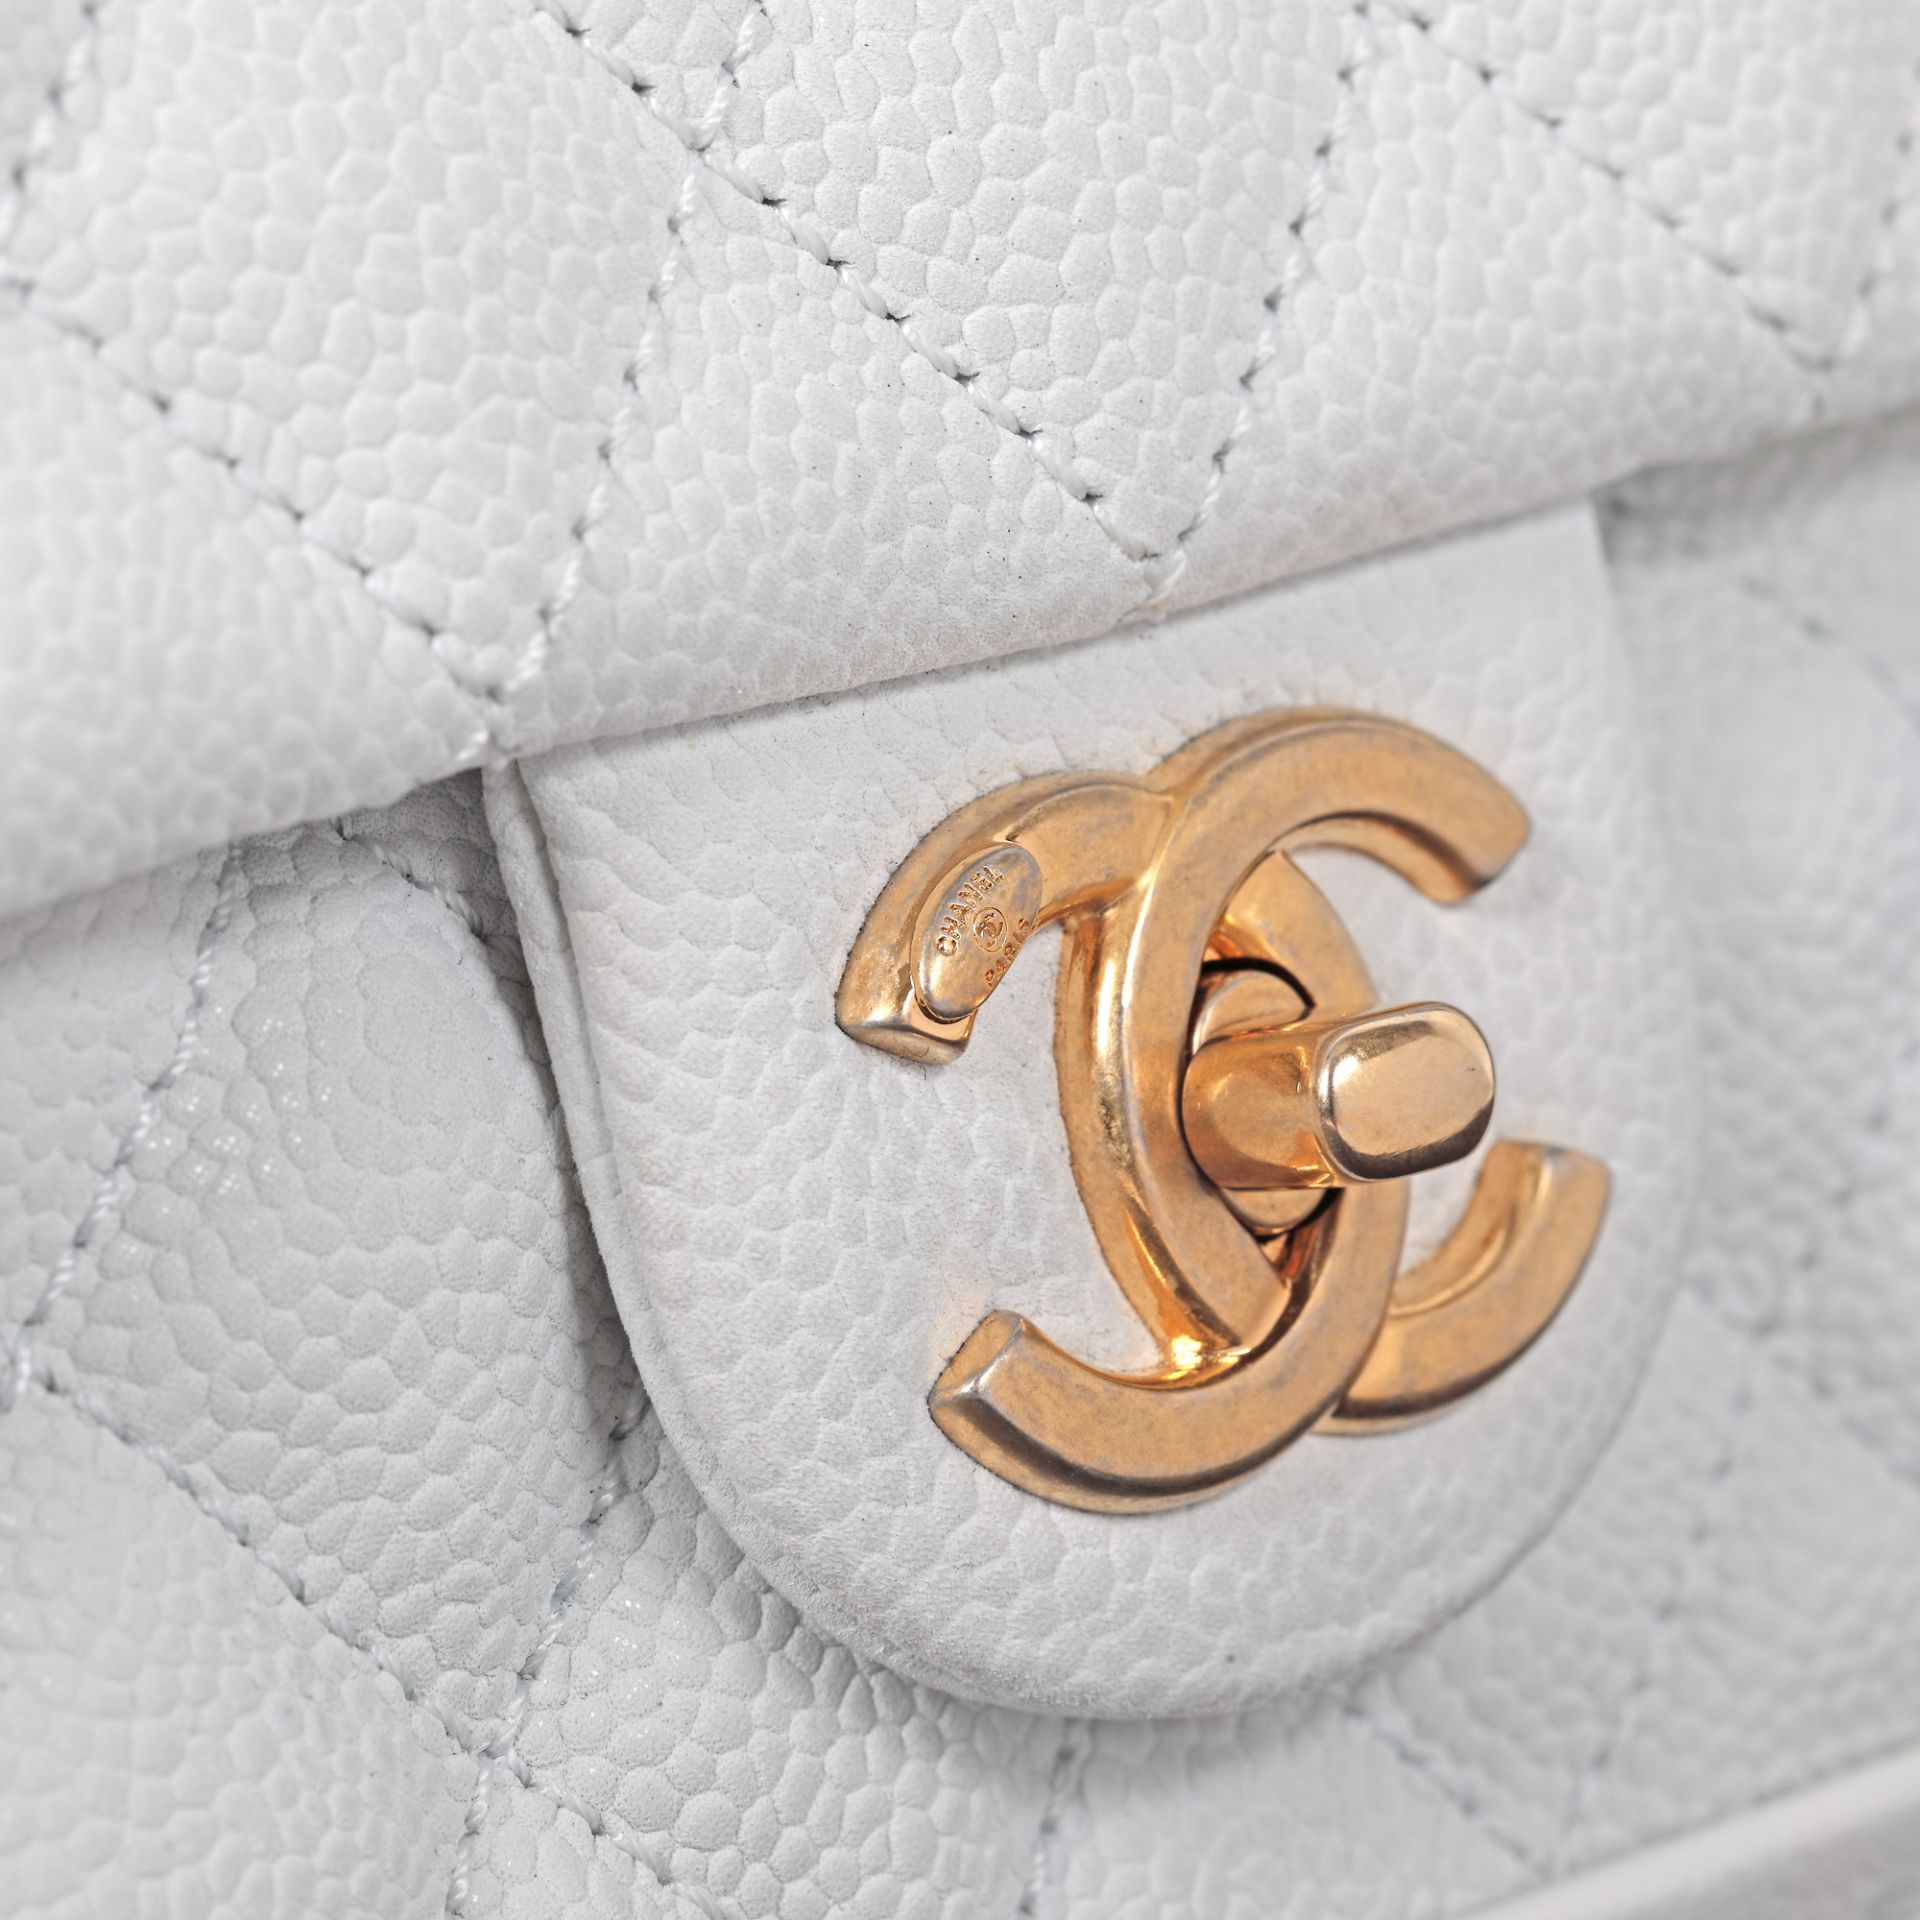 "Globe Trotter Flap" - Chanel bag, quilted leather, white - Image 3 of 6